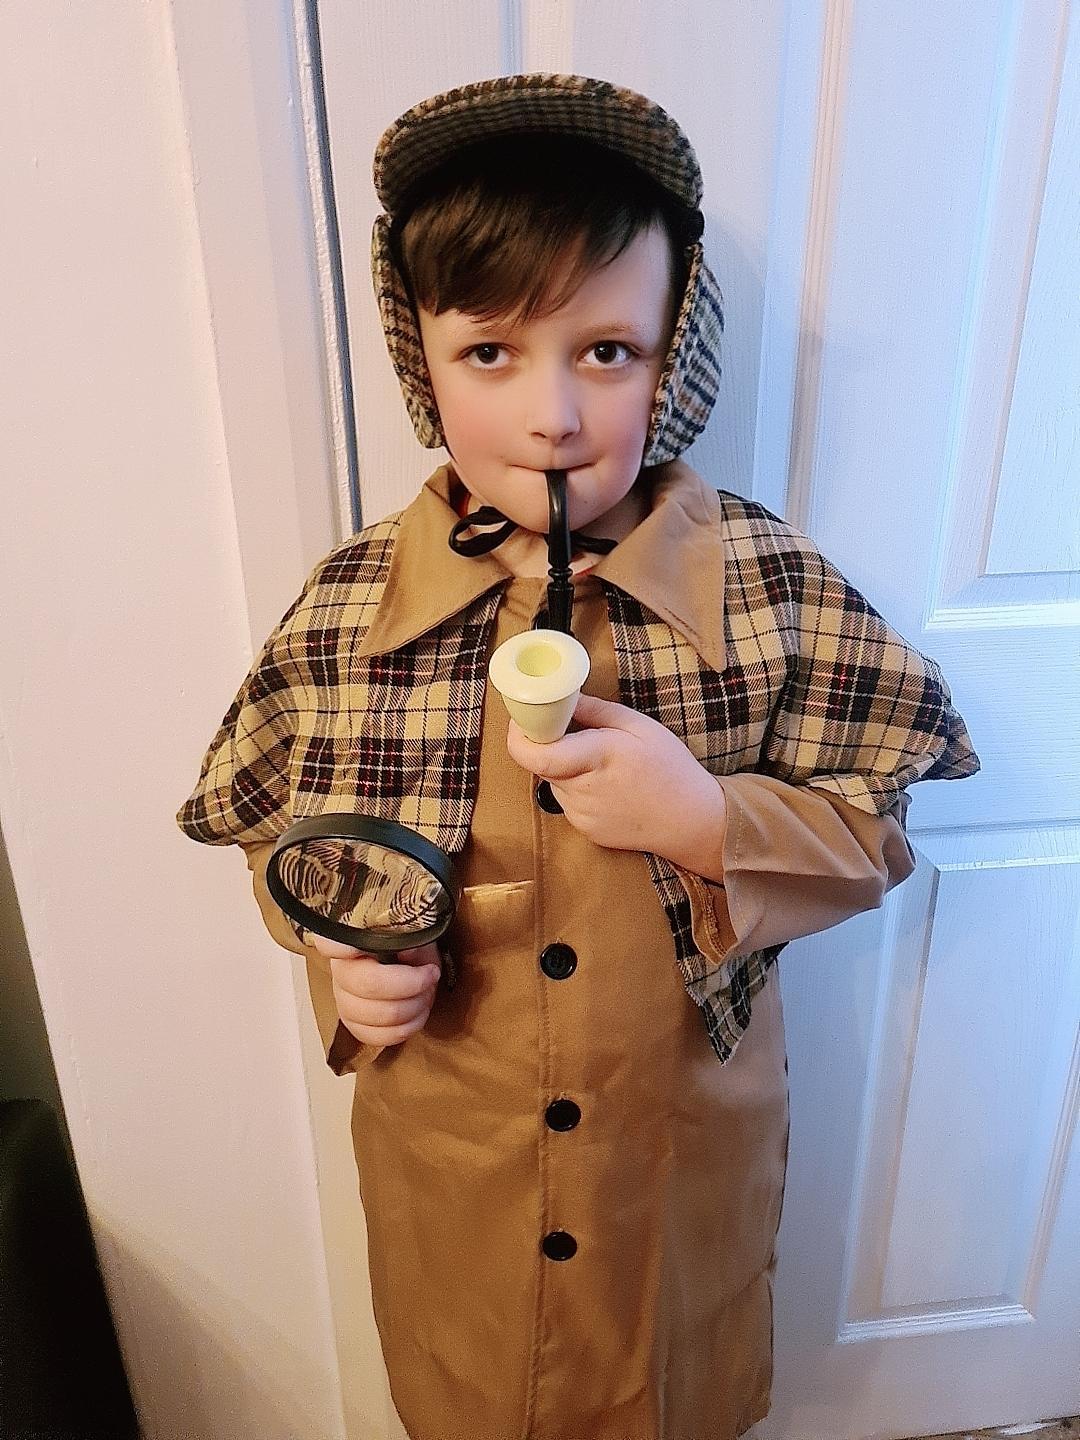 Dressing up as Sherlock Holmes is never a bad idea